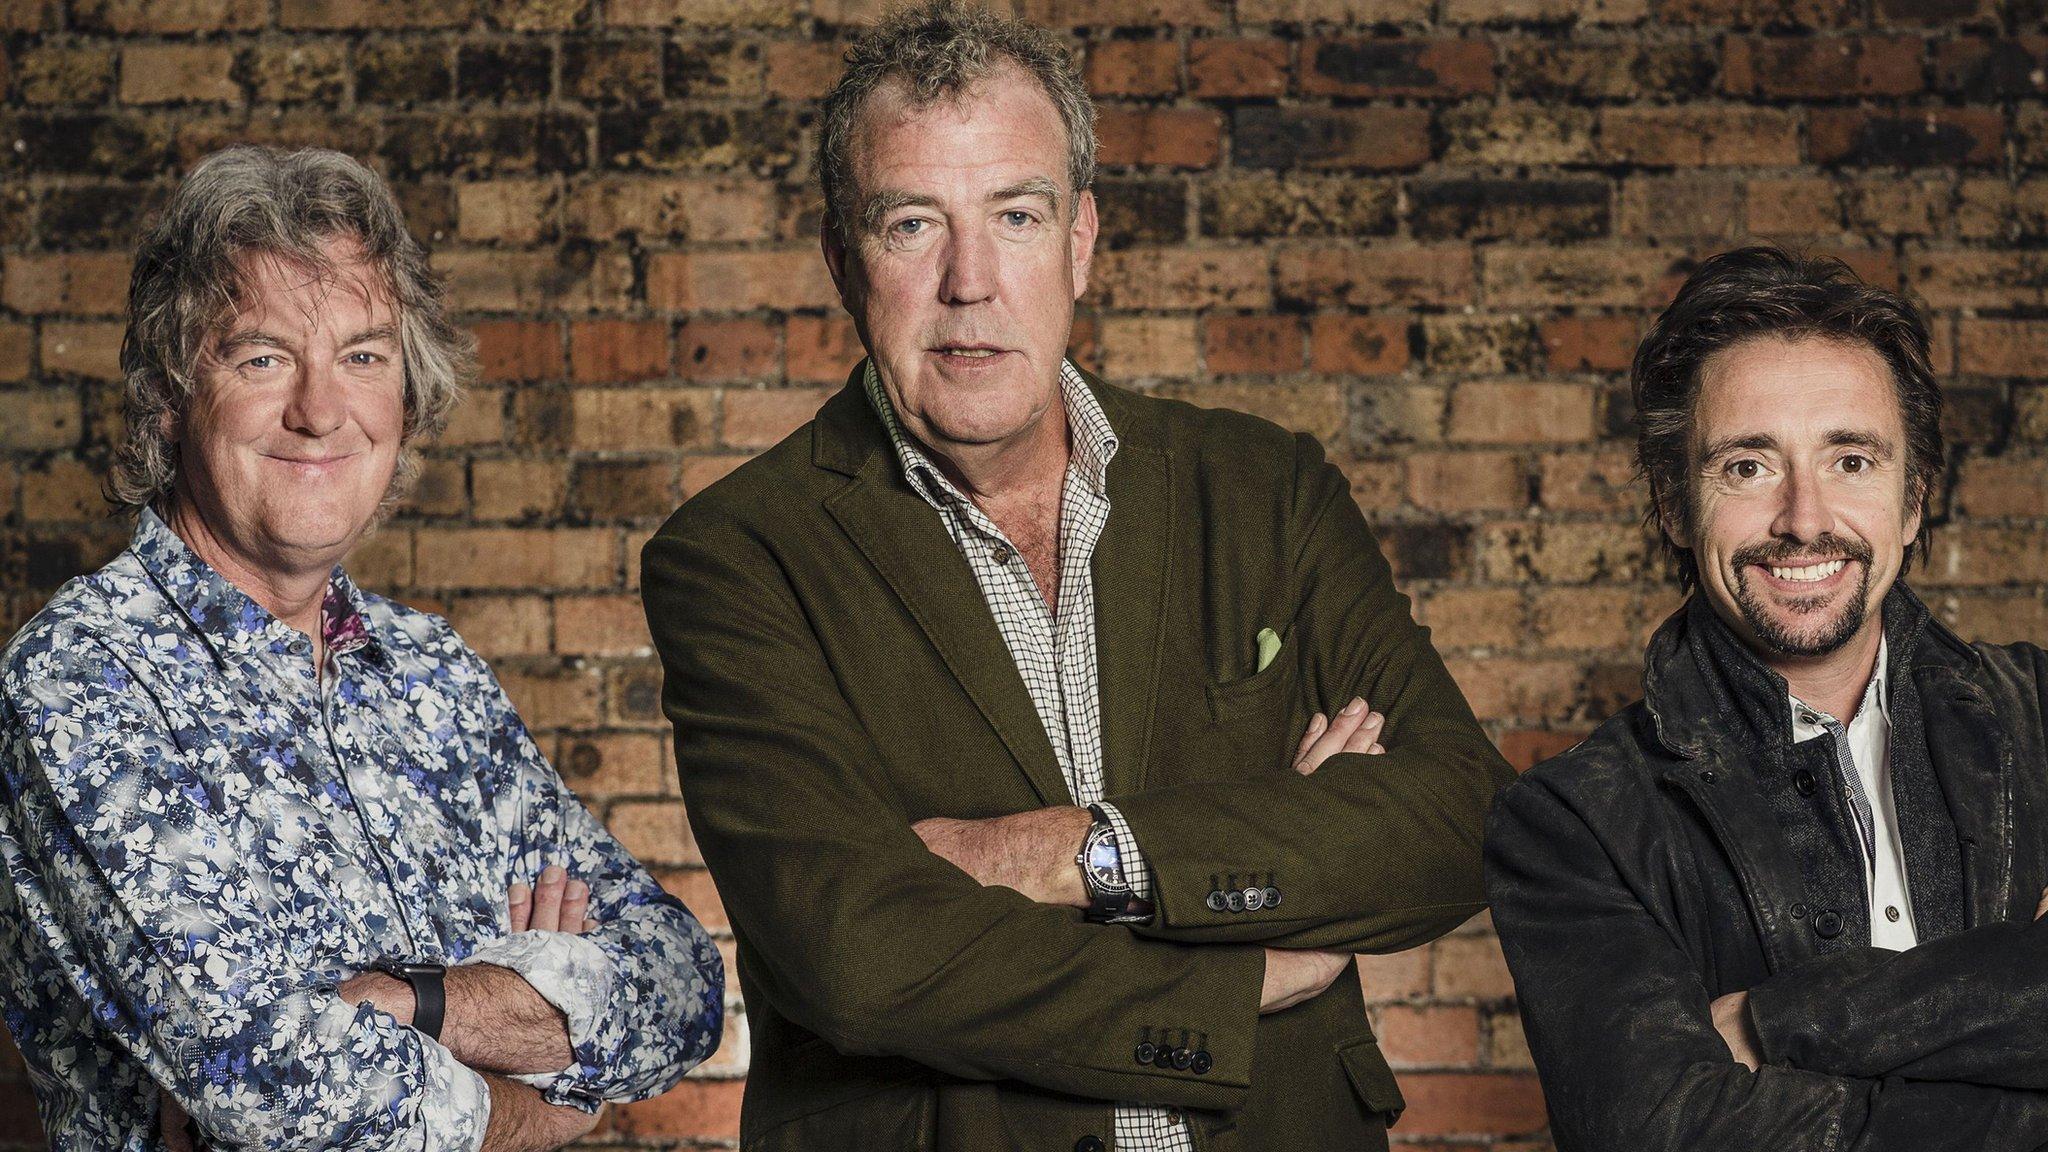 May, Clarkson, and Hammond present The Grand Tour